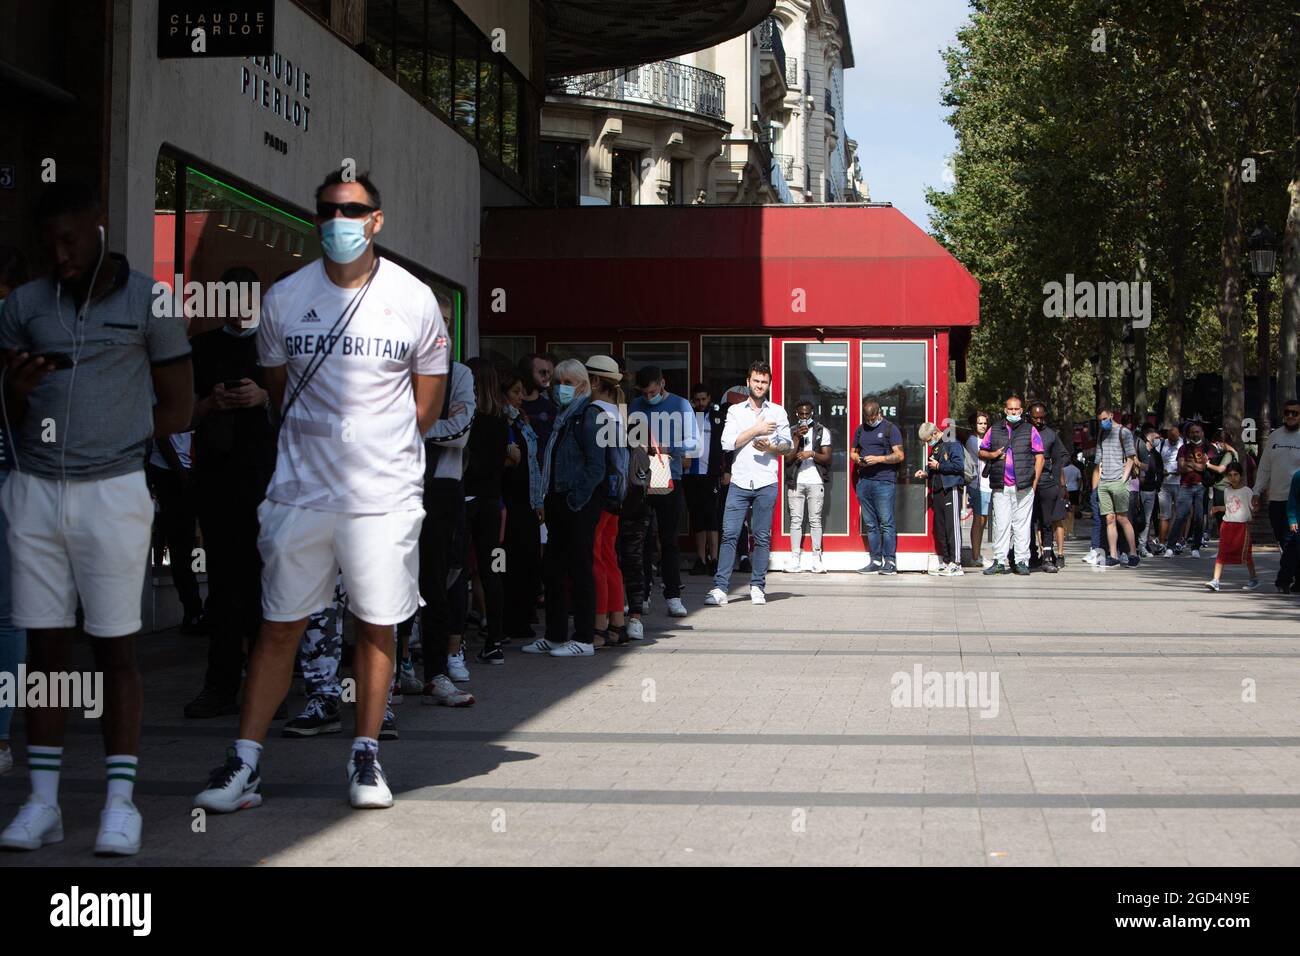 Paris, France. 11th Aug, 2021. People queue to buy a jersey of PSG's Argentinian football player Lionel Messi at the Paris-Saint-Germain (PSG) football club store on the Champs Elysees avenue in Paris on August 11, 2021. Messi signed on August 10, 2021 a two-year deal with PSG with the option of an additional year. The 34-year-old will wear the number 30 in Paris, the number he had when he began his professional career at Barca. Photo by Raphael Lafargue/ABACAPRESS.COM Credit: Abaca Press/Alamy Live News Stock Photo